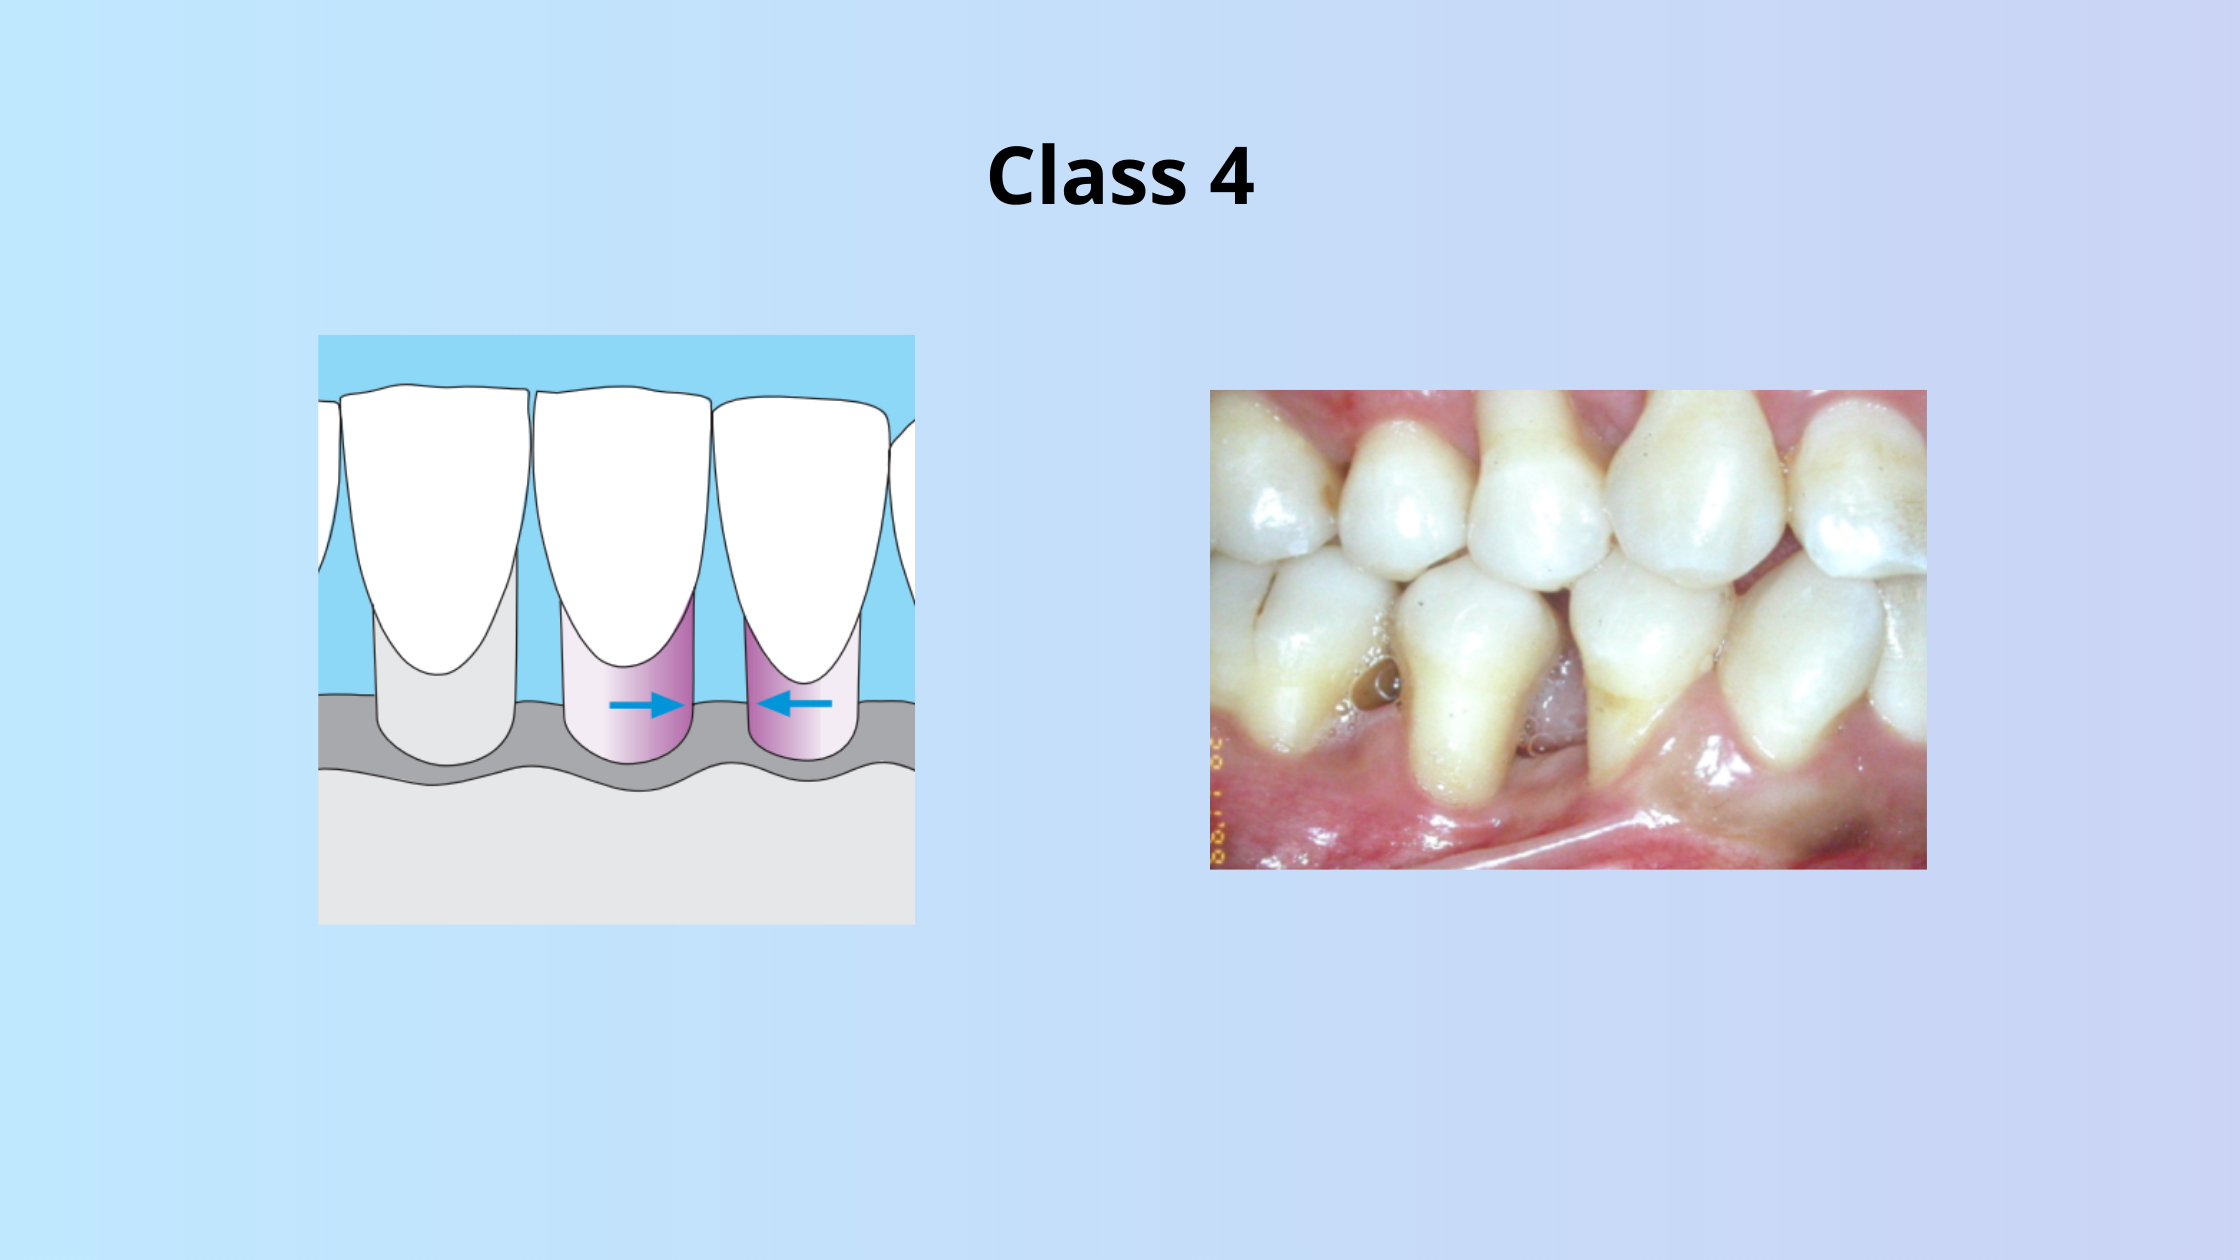 Class 4 of gingival recession according to Miller